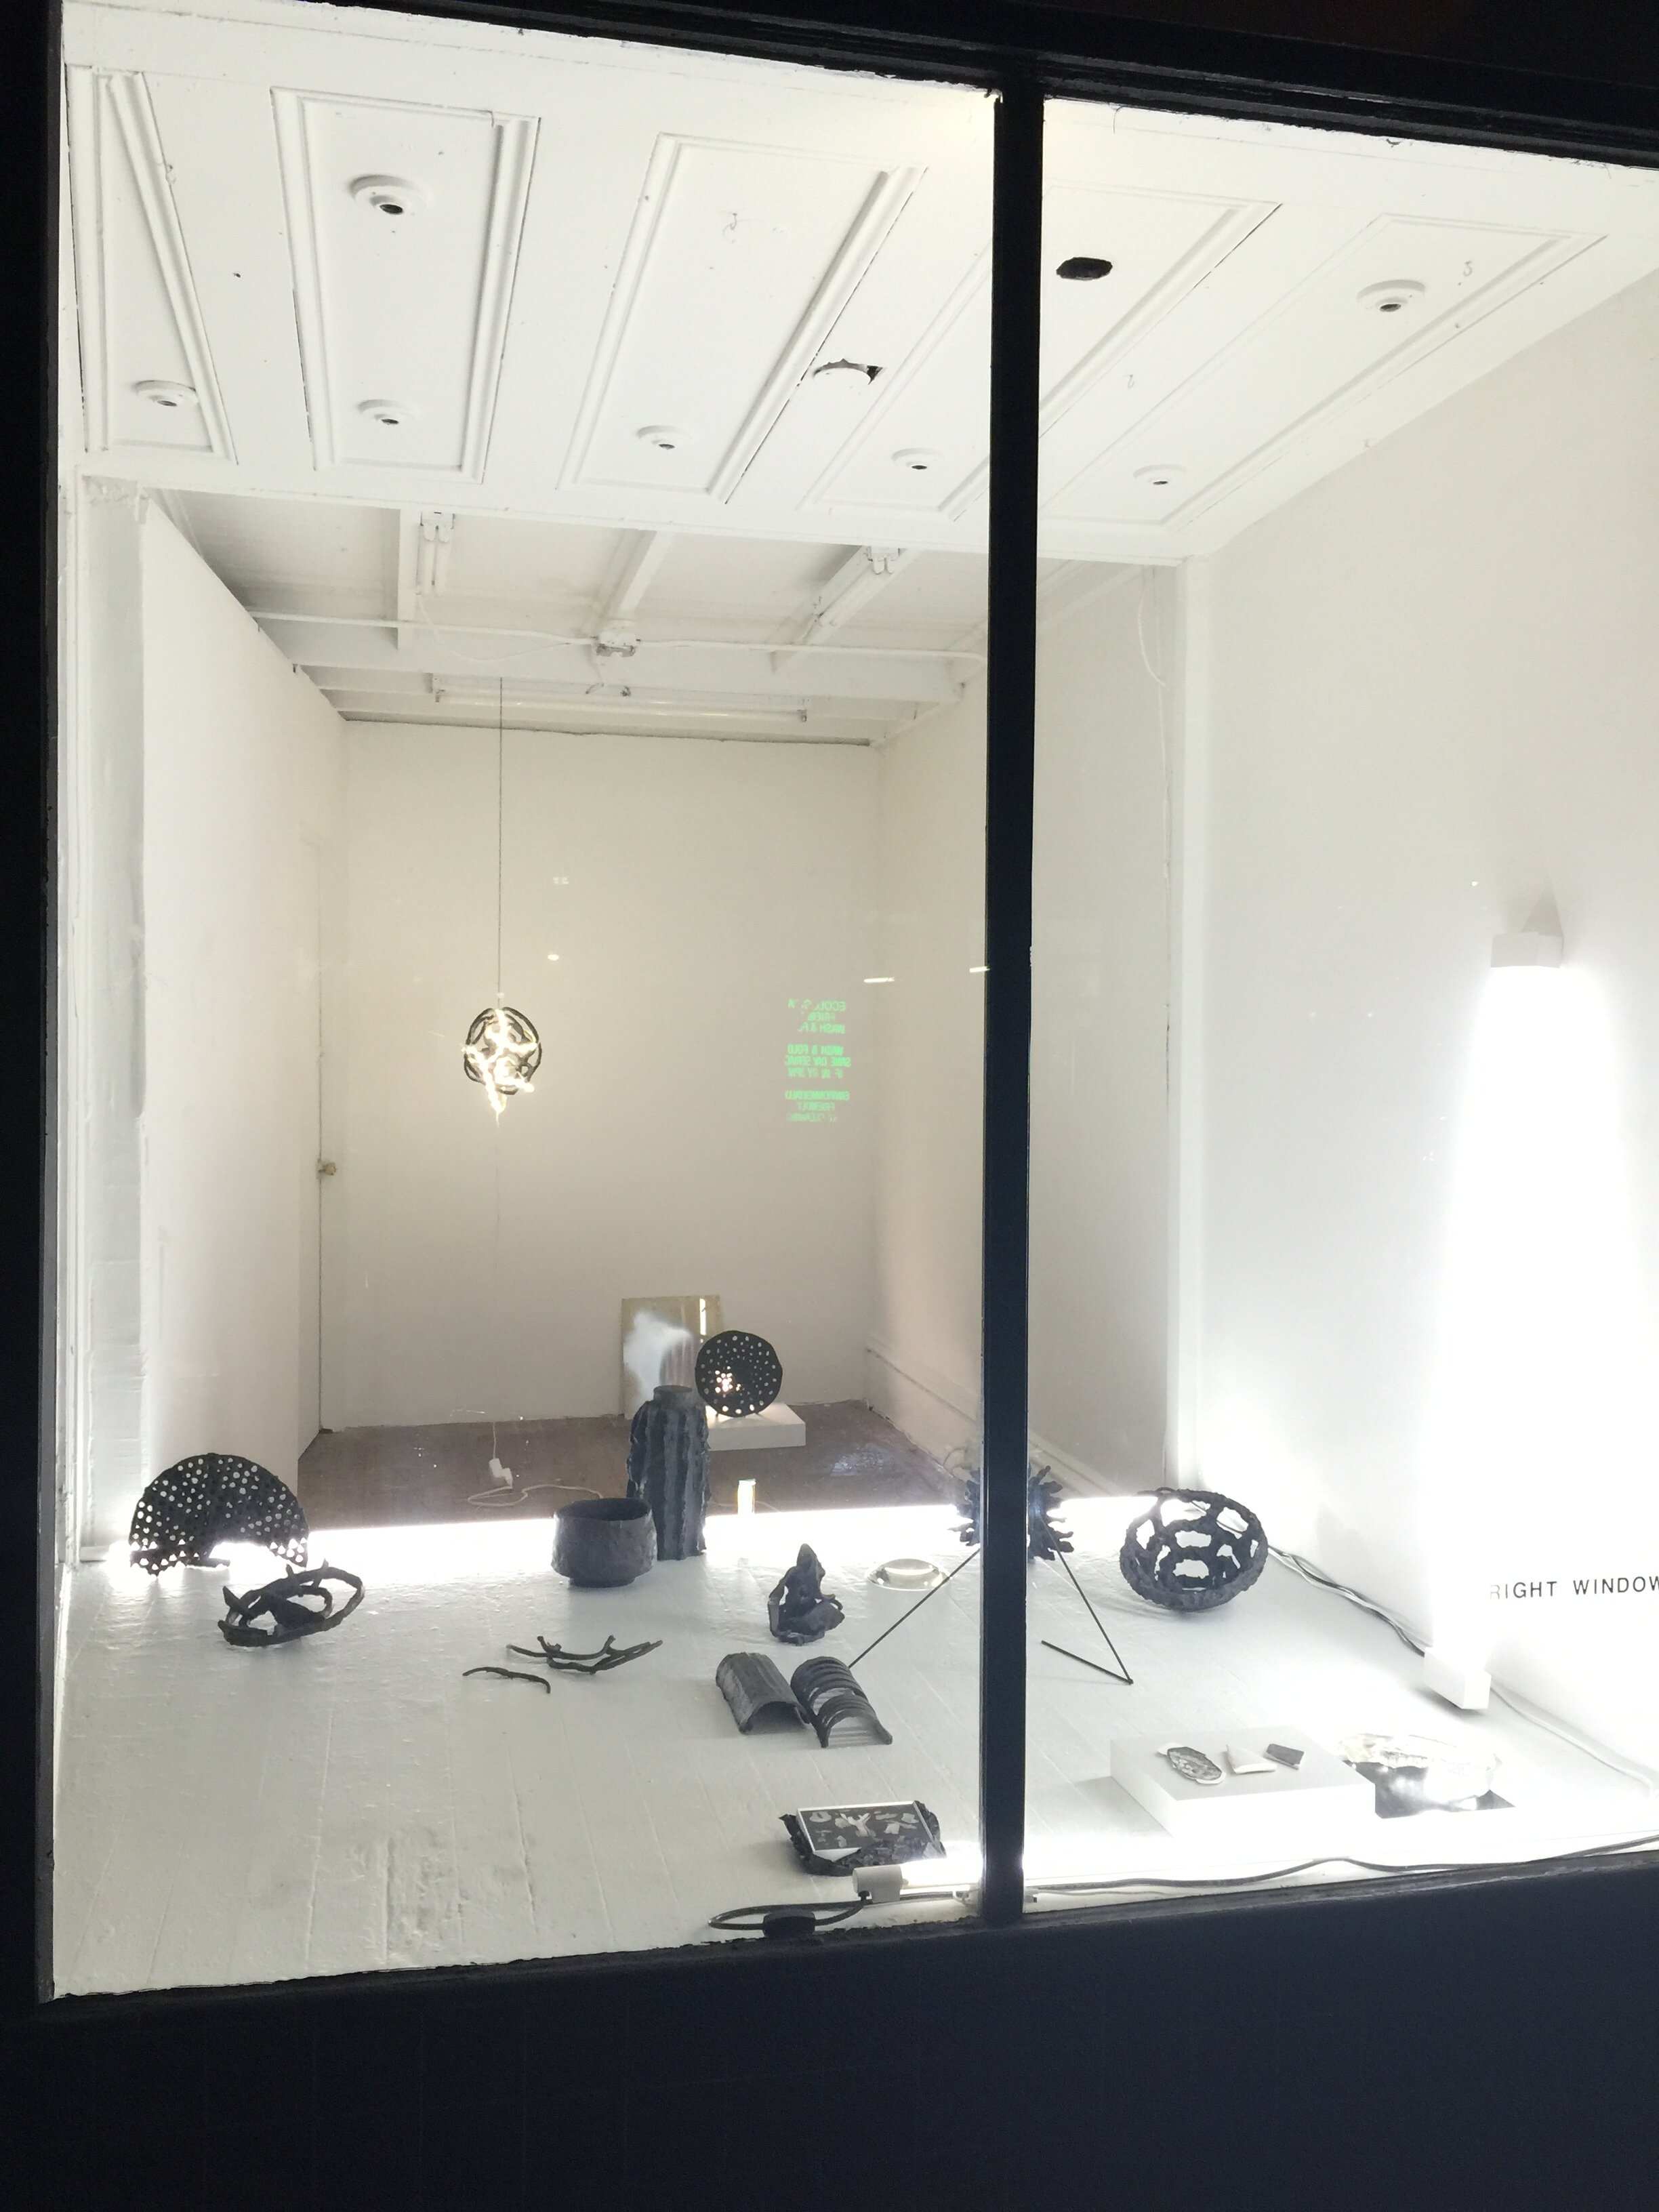   Vases and Hallucinations,  installation view, Right Window, 2015 